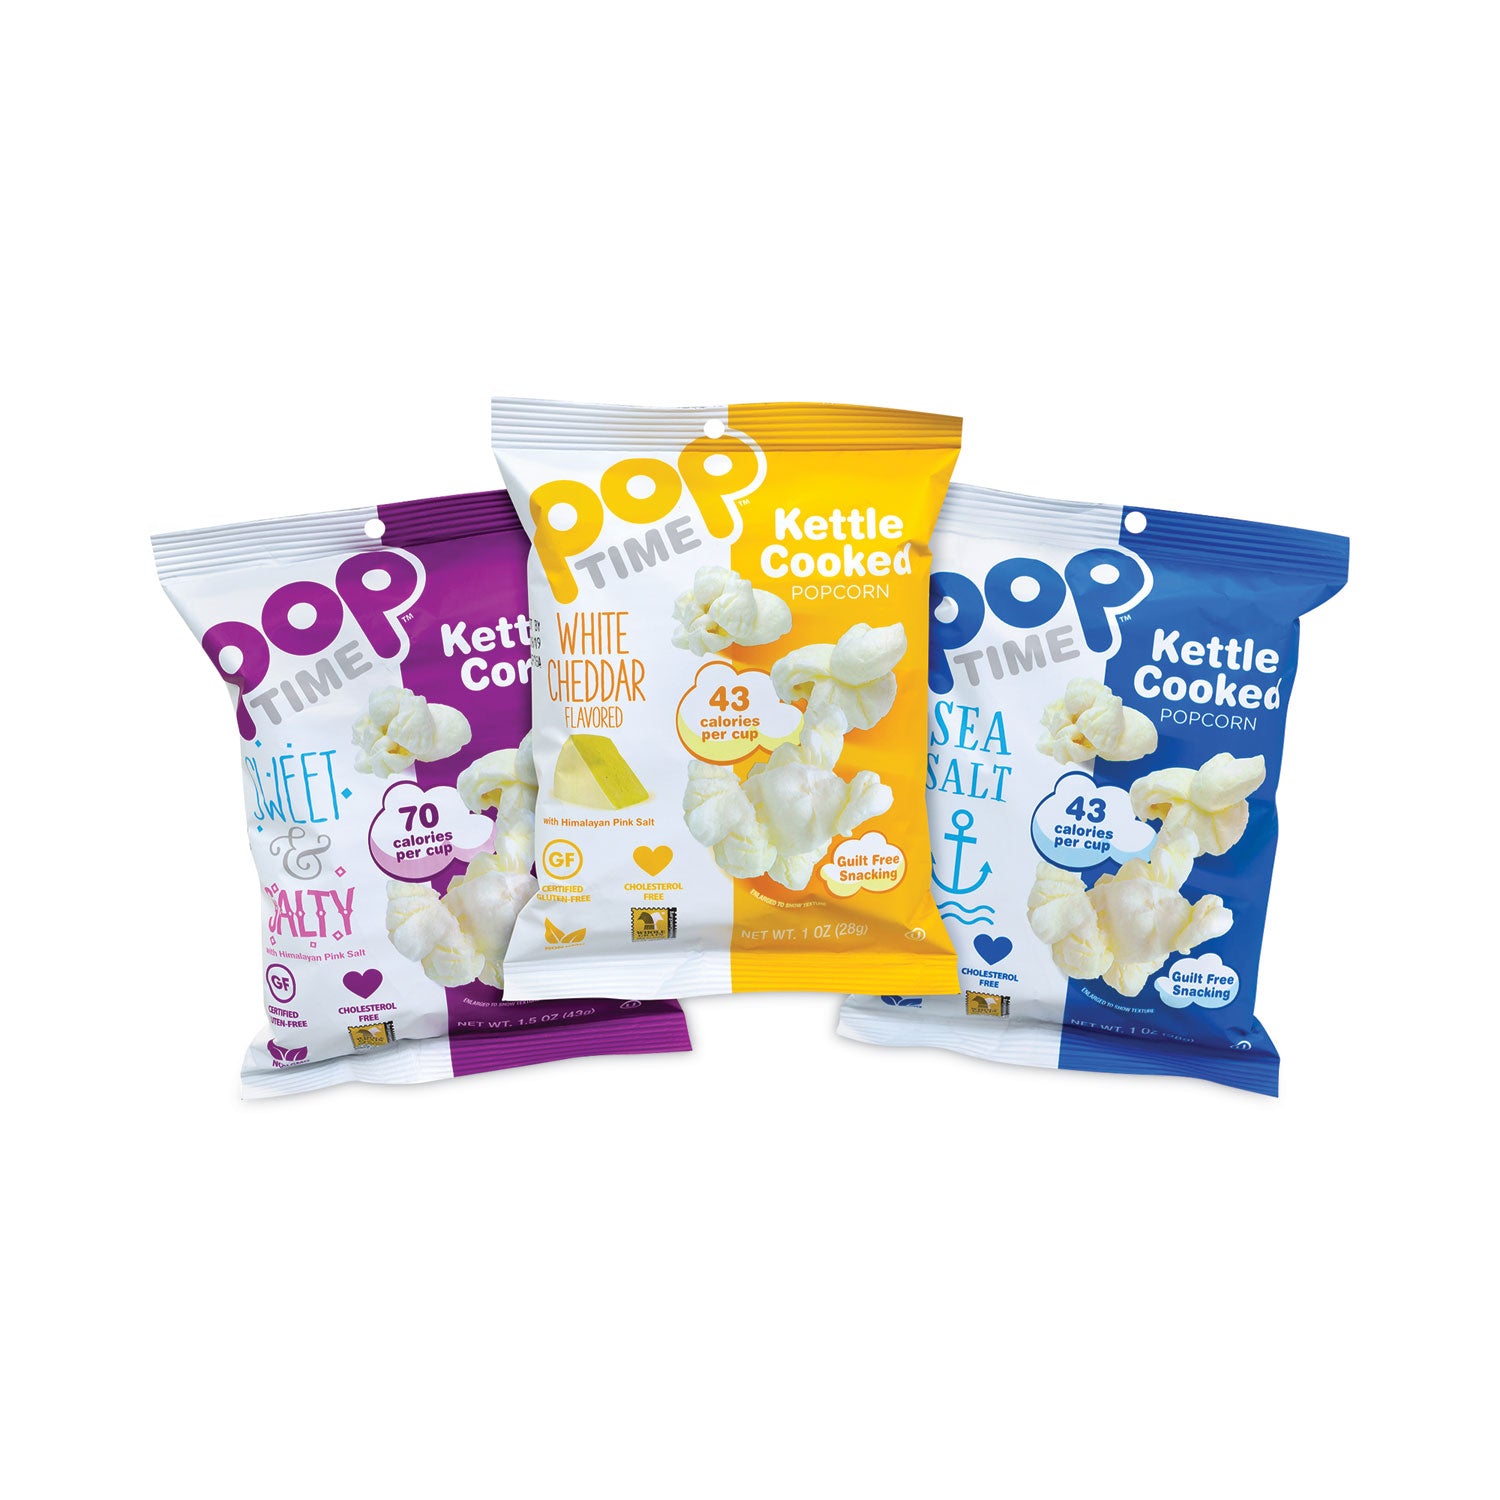 kettle-cooked-popcorn-variety-pack-assorted-flavors-1-oz-bag-24-carton-ships-in-1-3-business-days_grr20902646 - 1